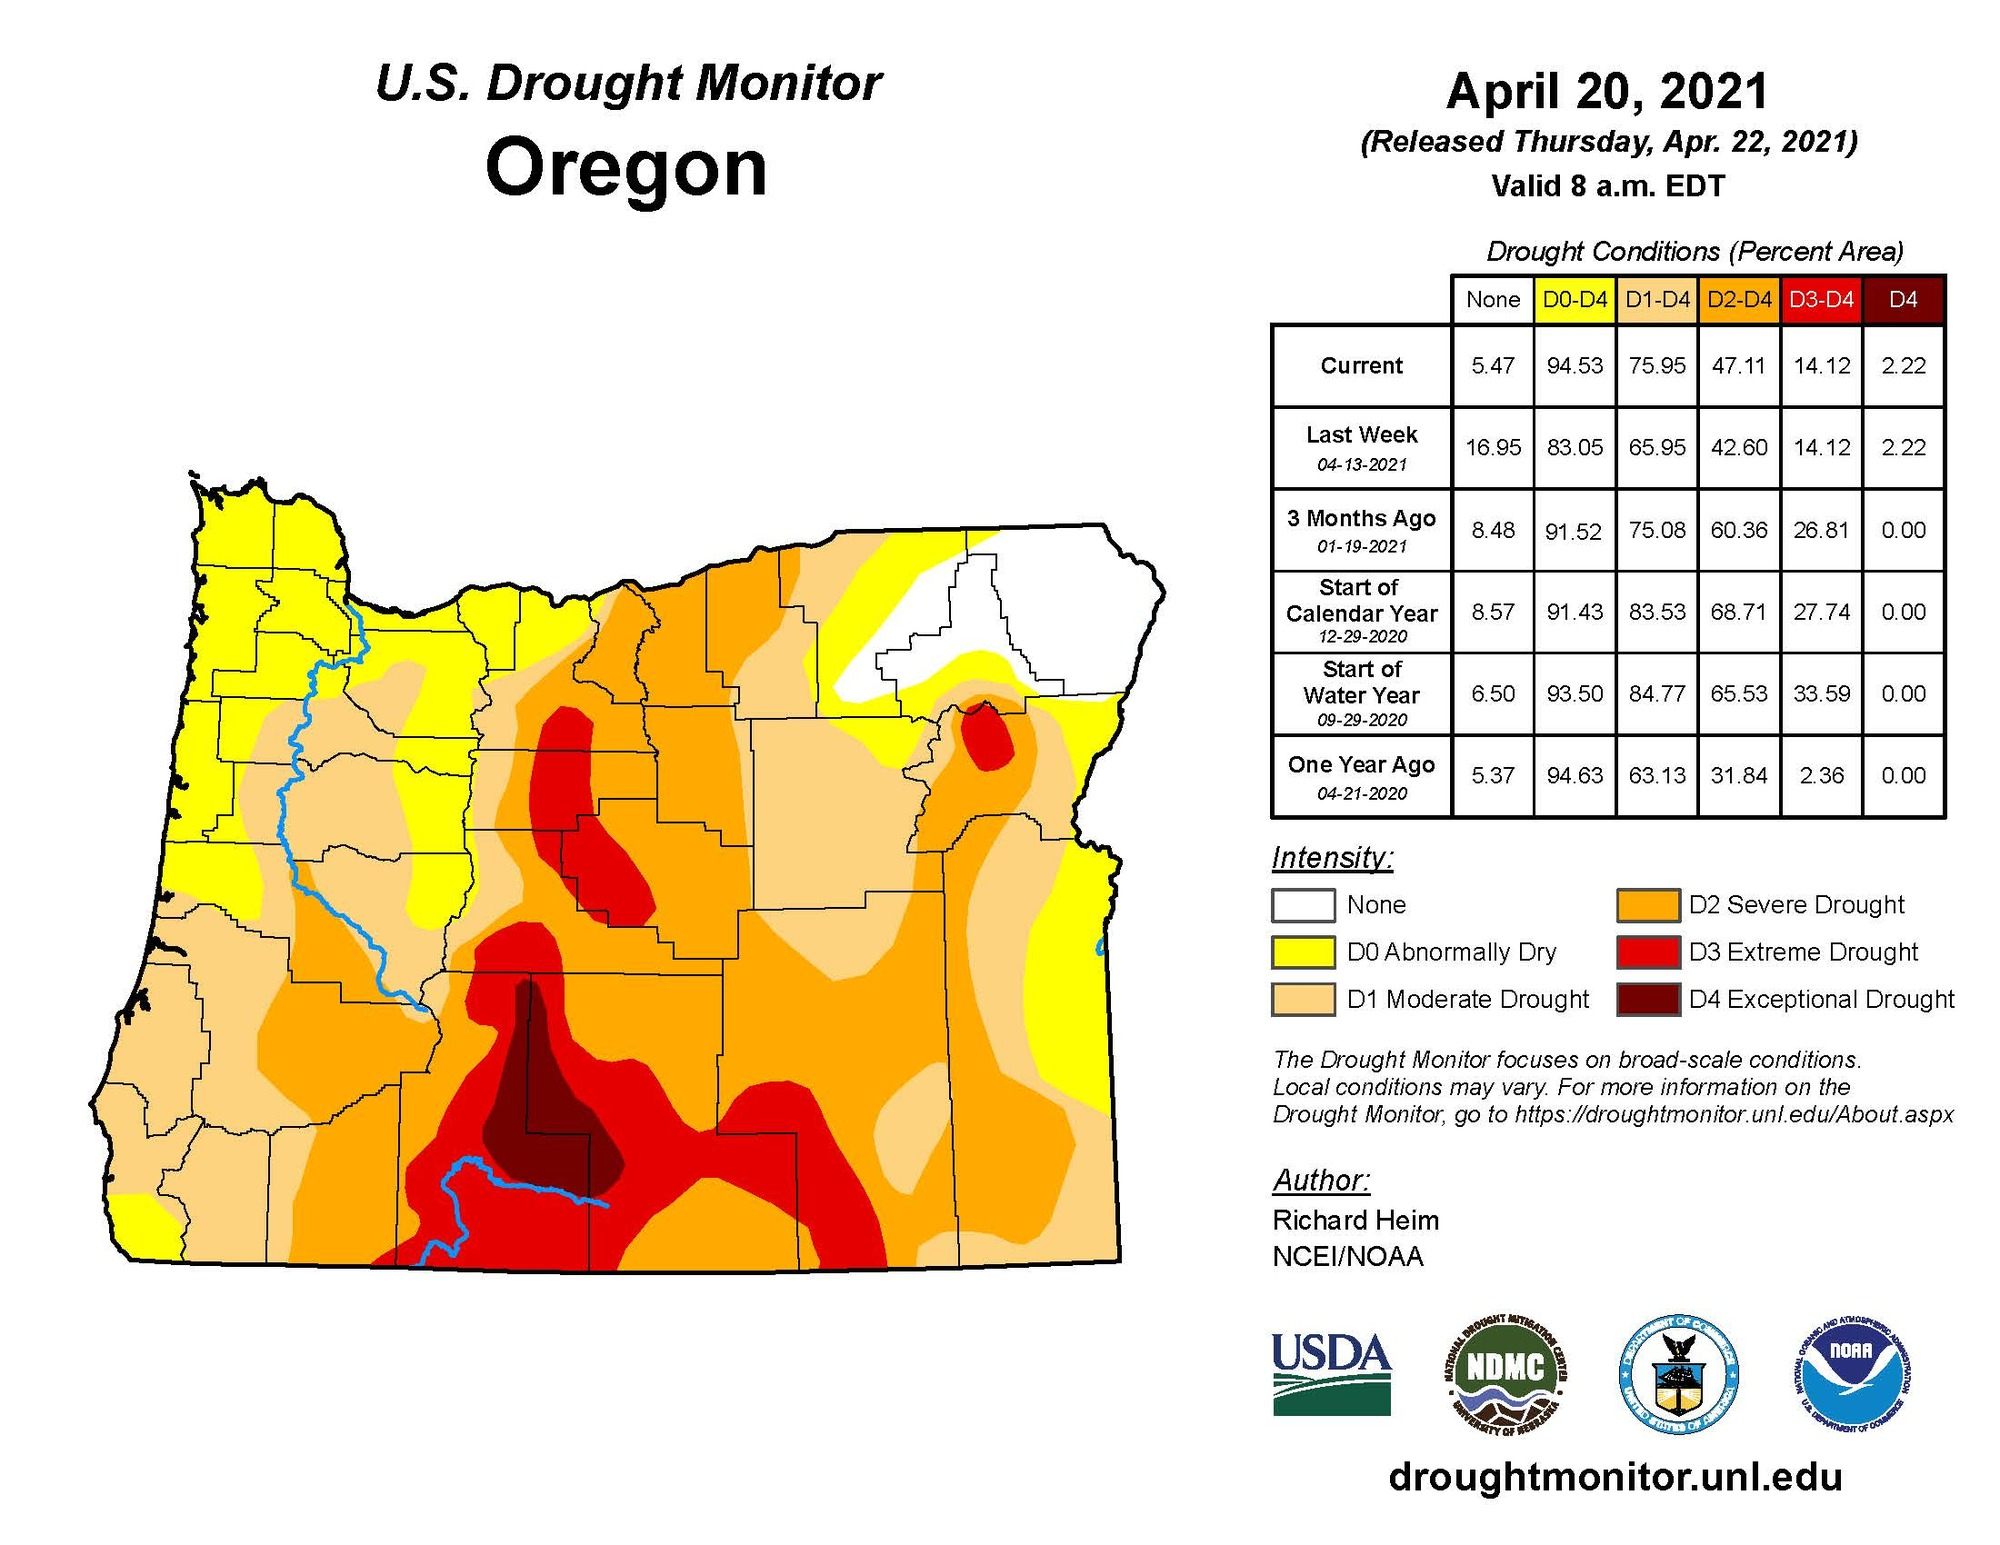 U.S. Drought Monitor map of Oregon with key and legend. April 2021